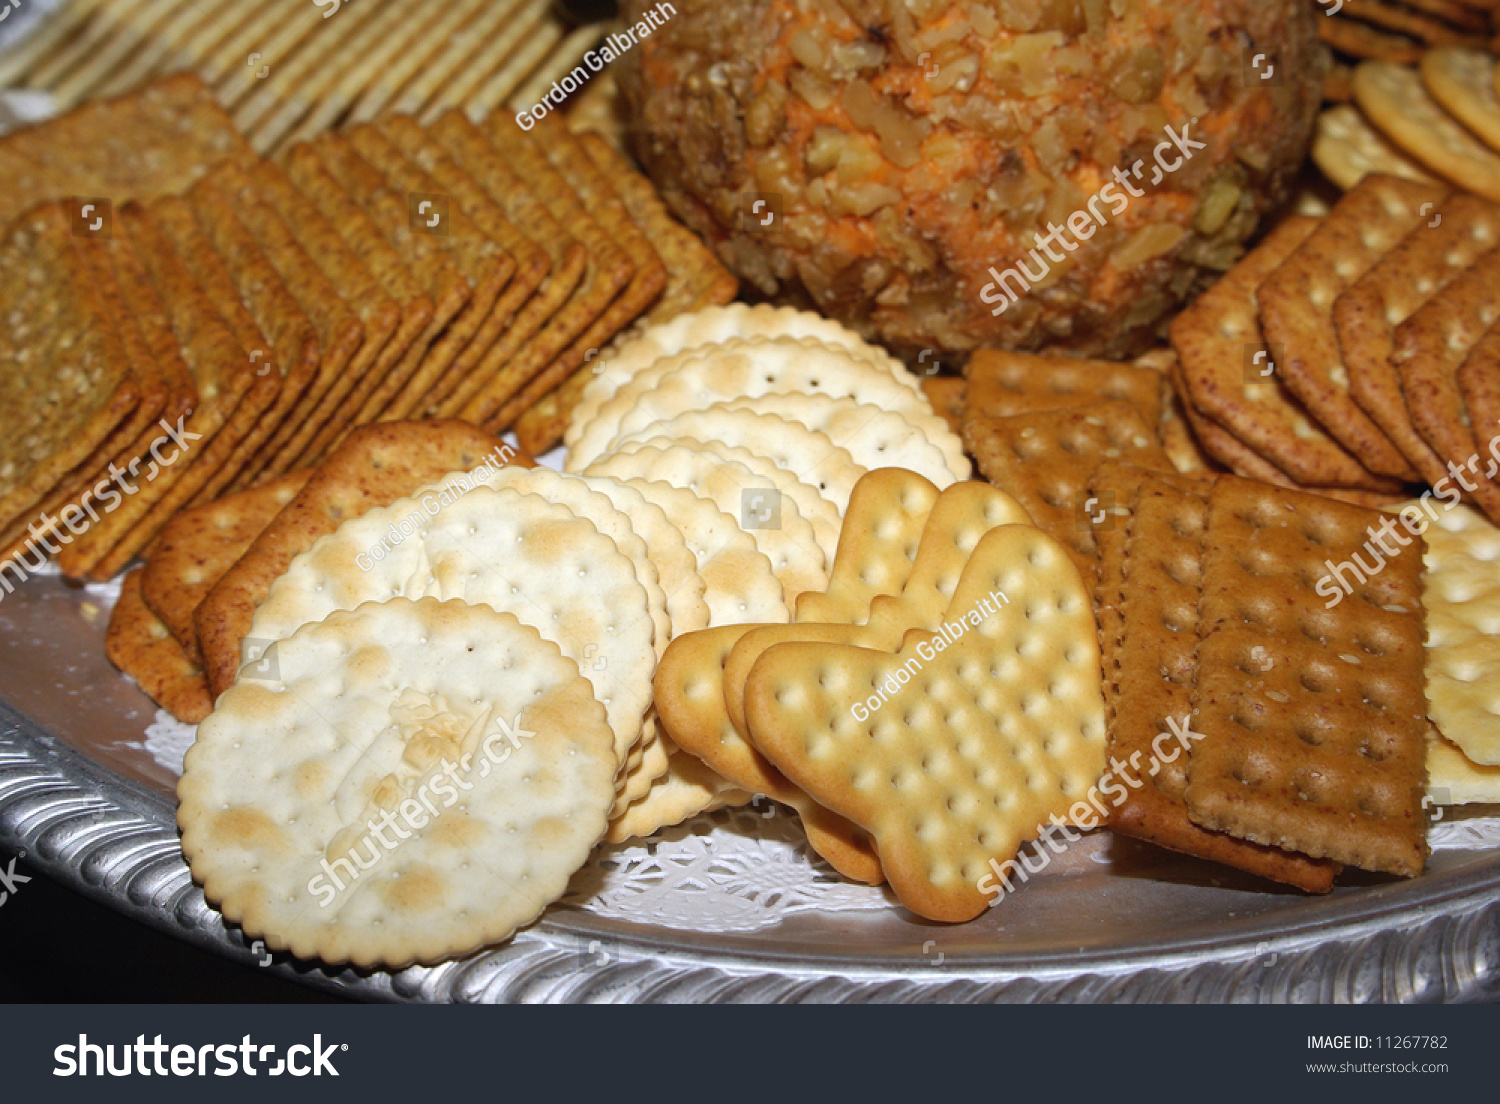 Closeup Of Different Cracker Assortment On A Tray Stock Photo 11267782